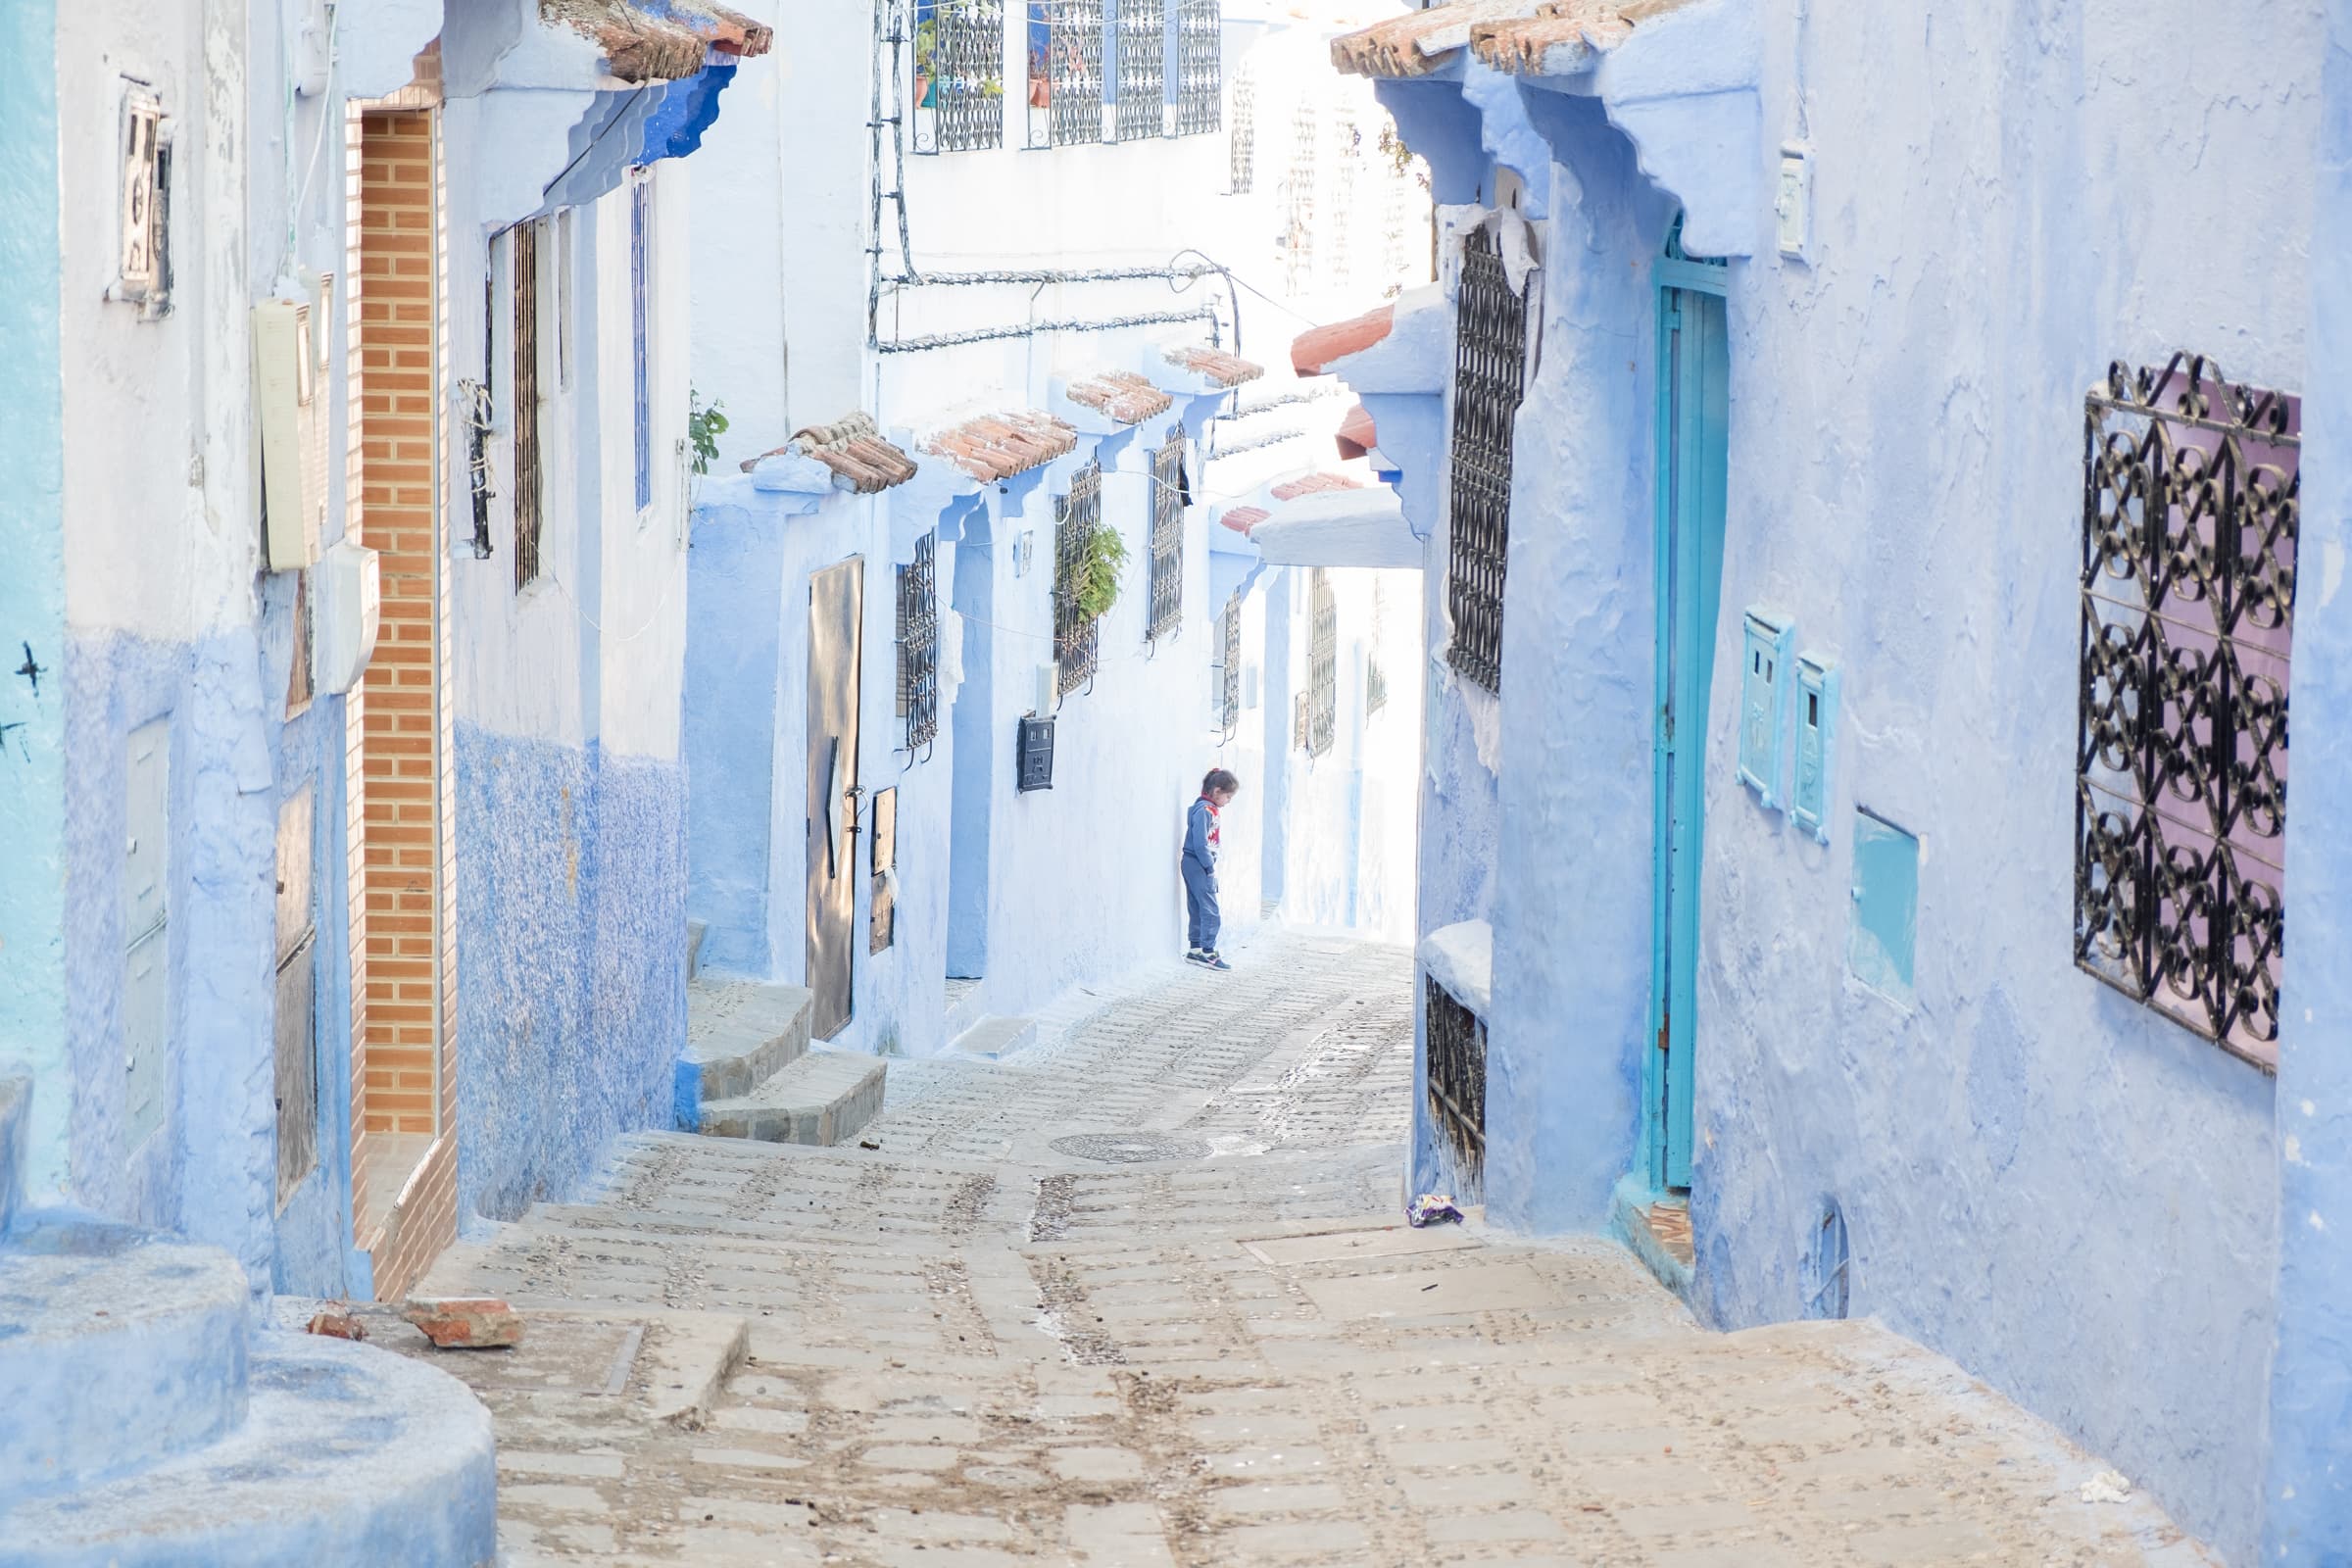 A small girl standing in the blue streets of Chefchaouen, Morocco